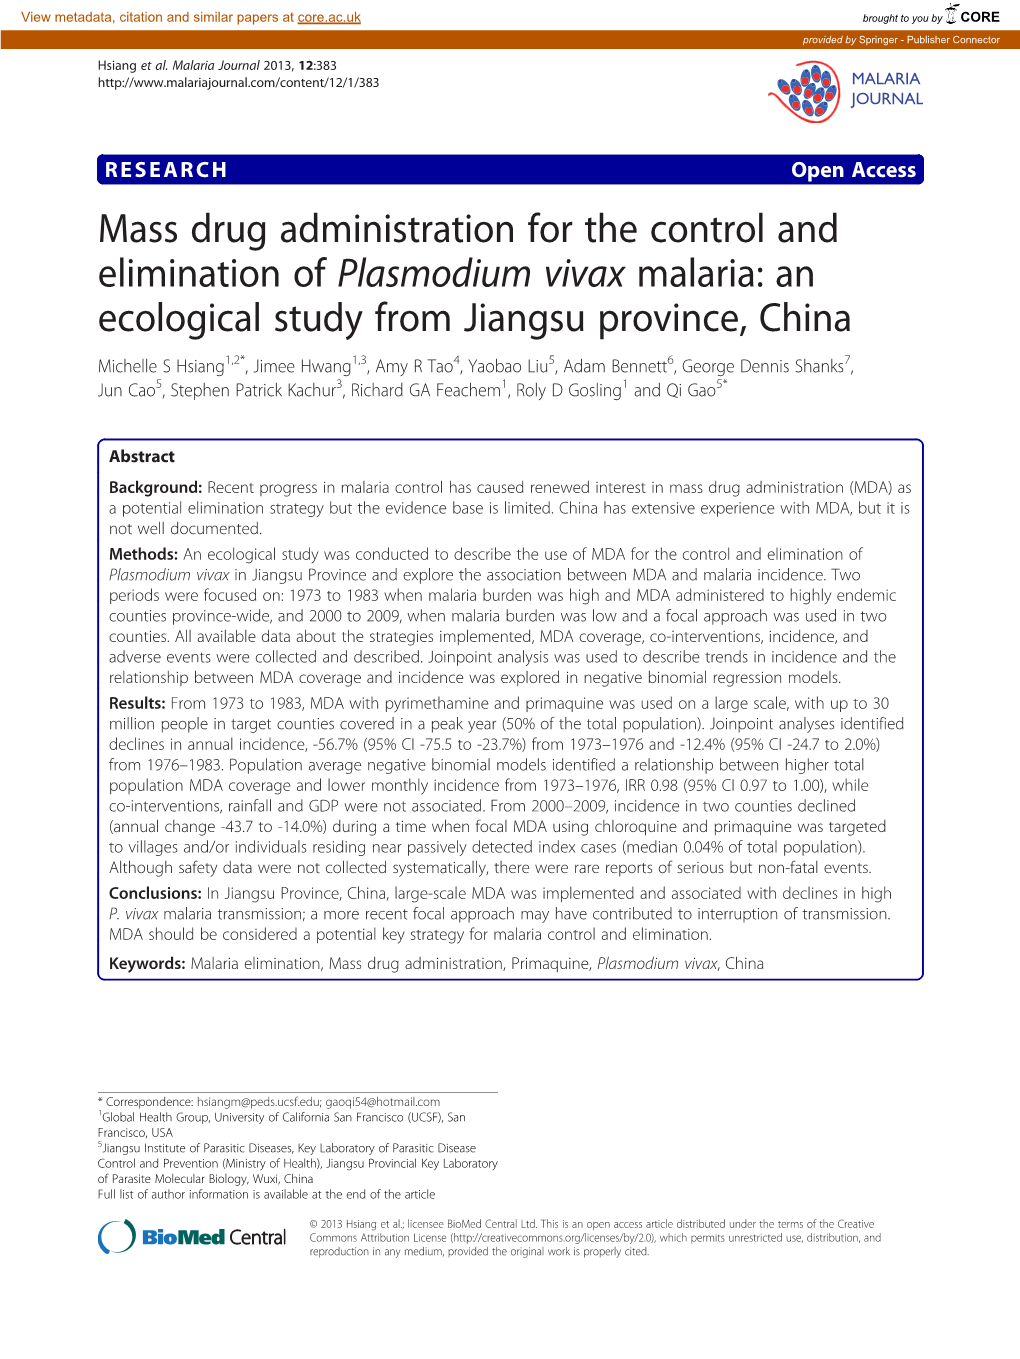 Mass Drug Administration for the Control and Elimination Of